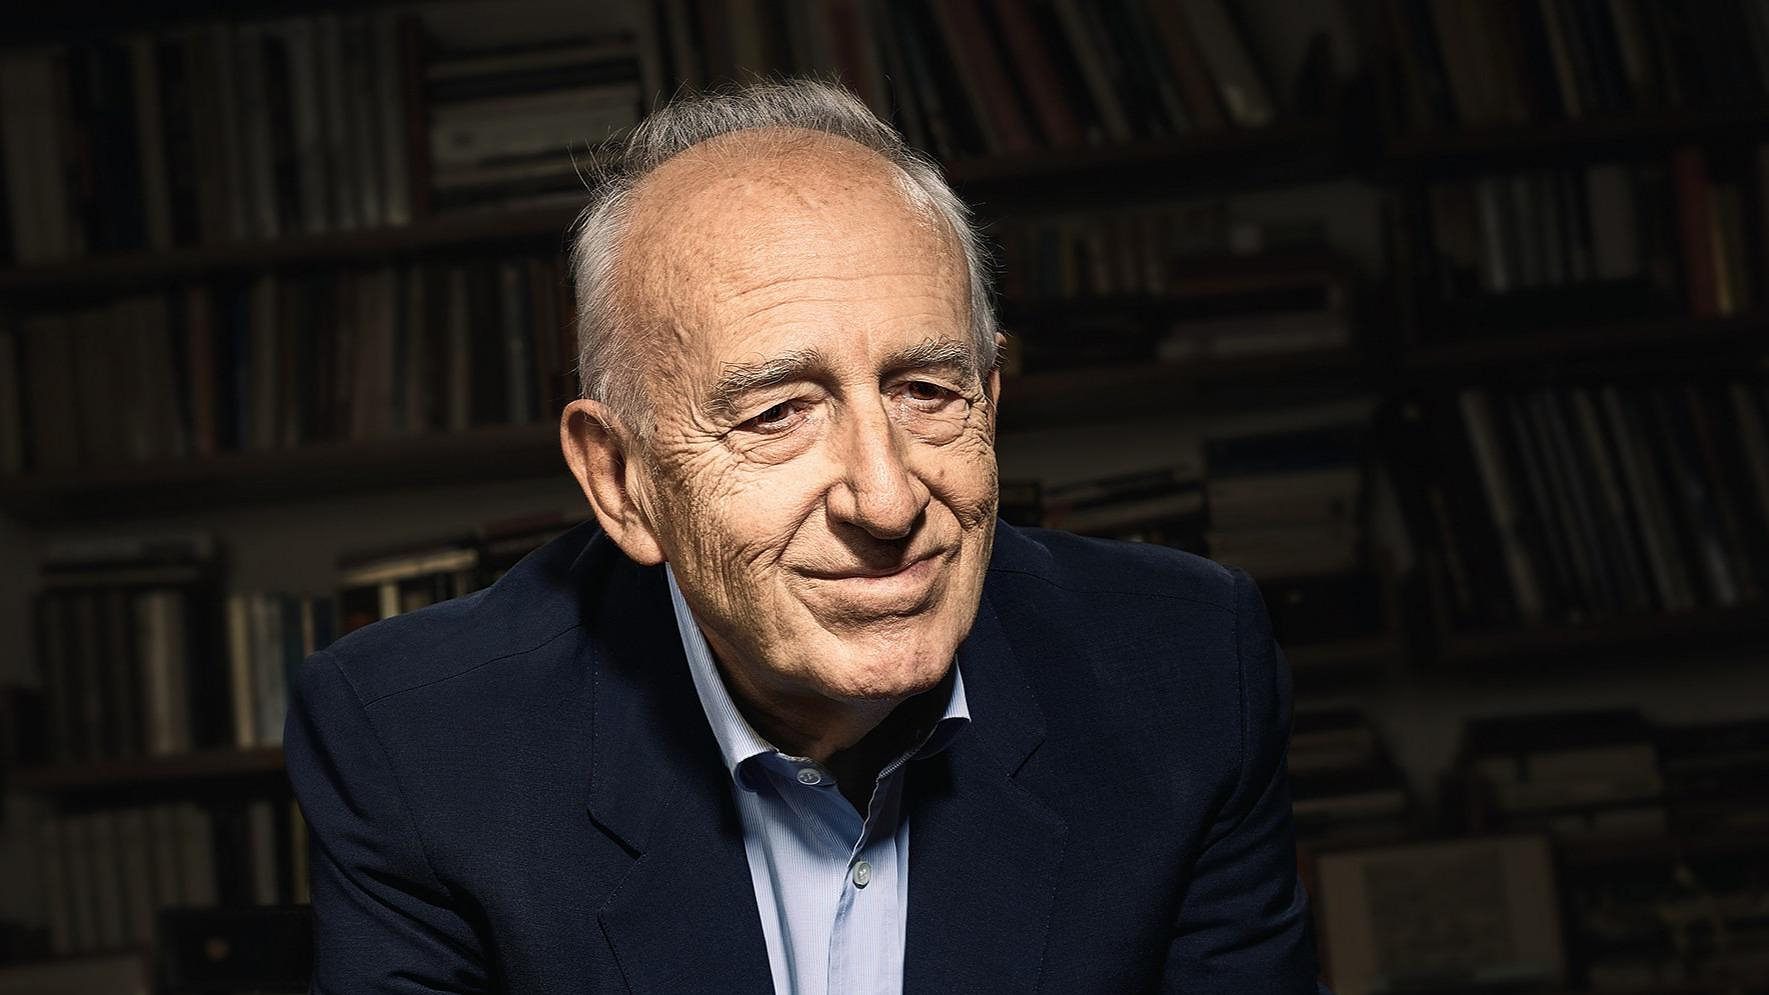 Death of Maurizio Pollini, a game of excellence in the service of the piano